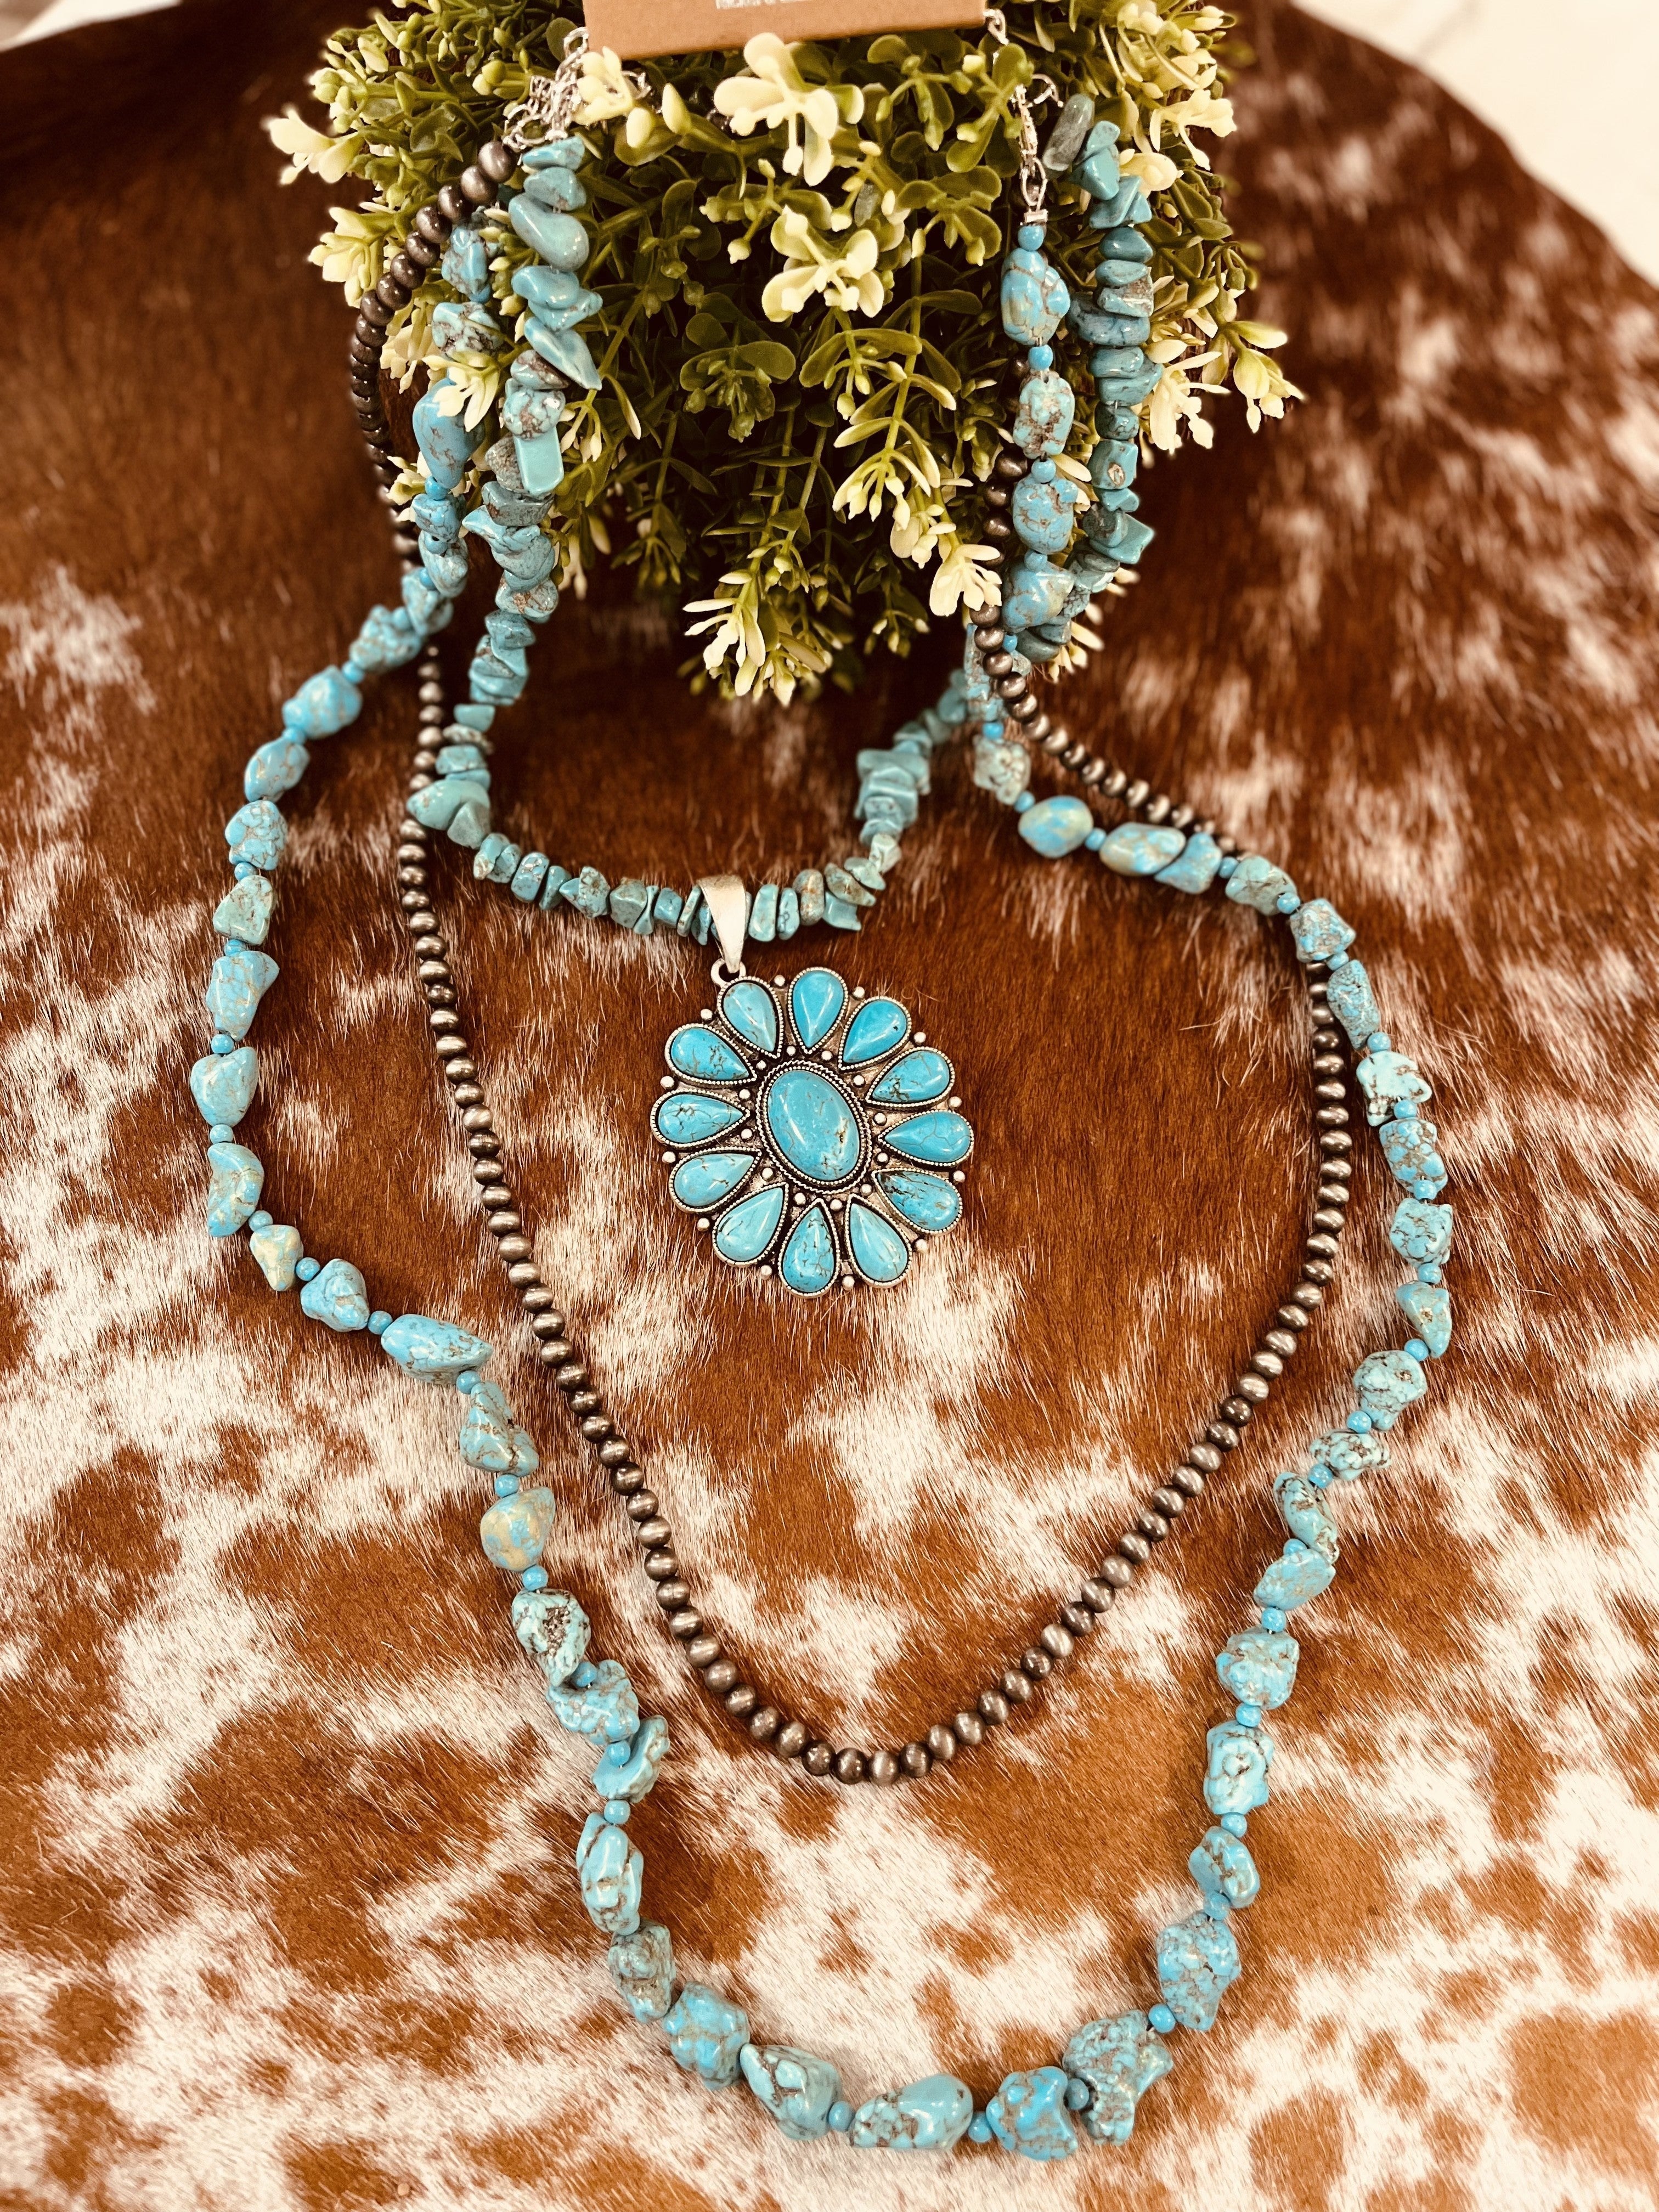 Natural Turquoise Squash Blossom Necklace